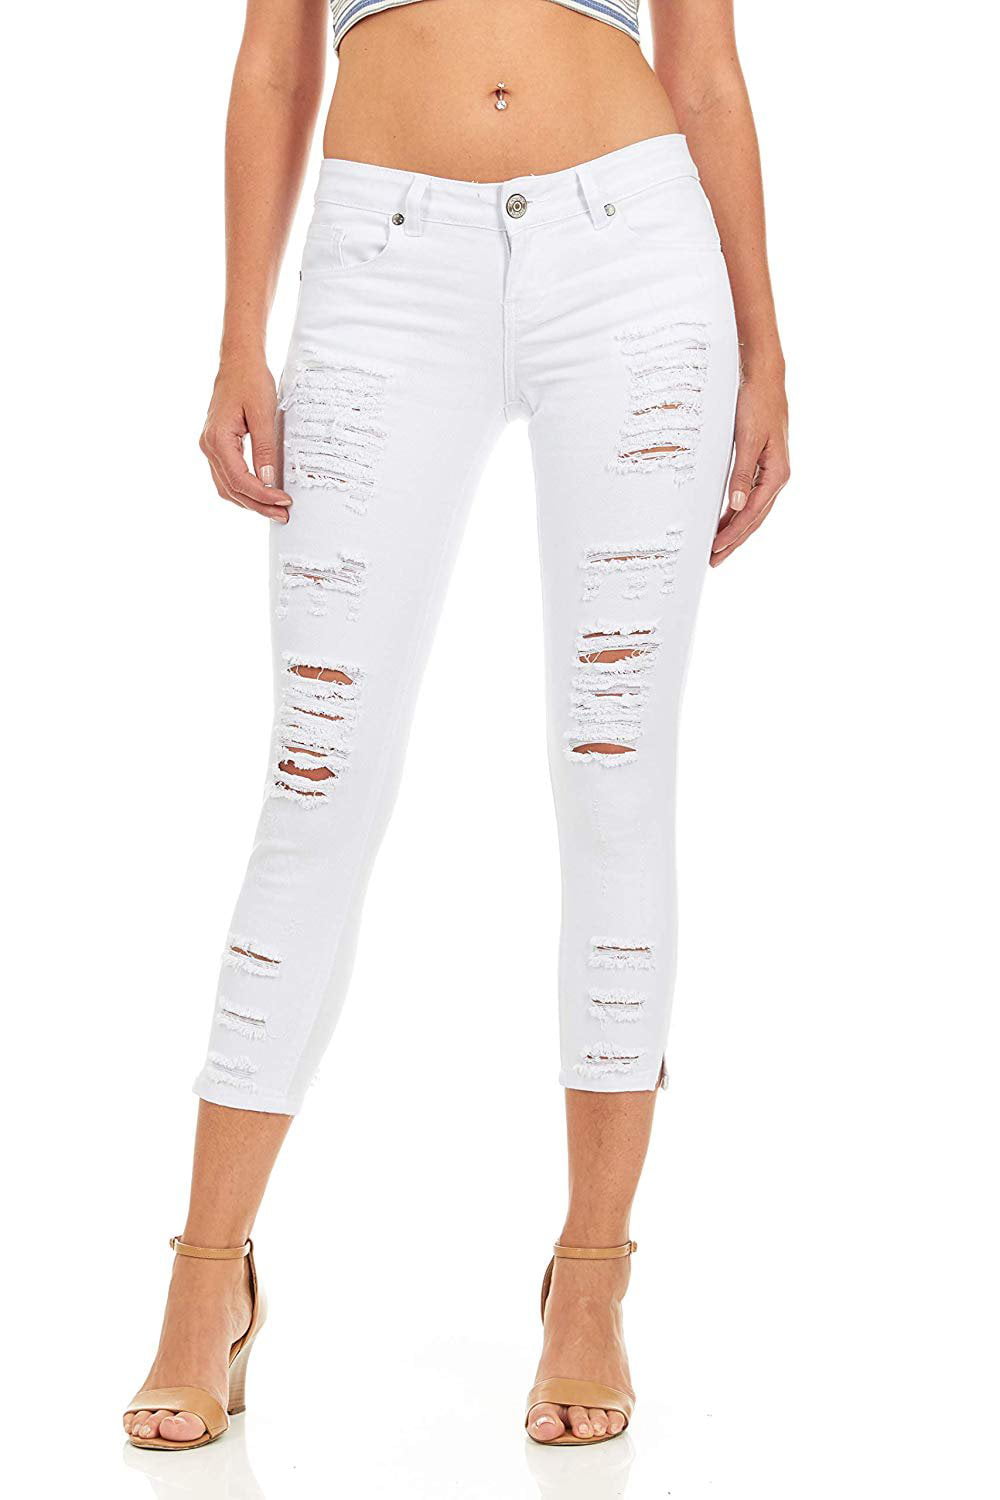 ripped jeans size 1